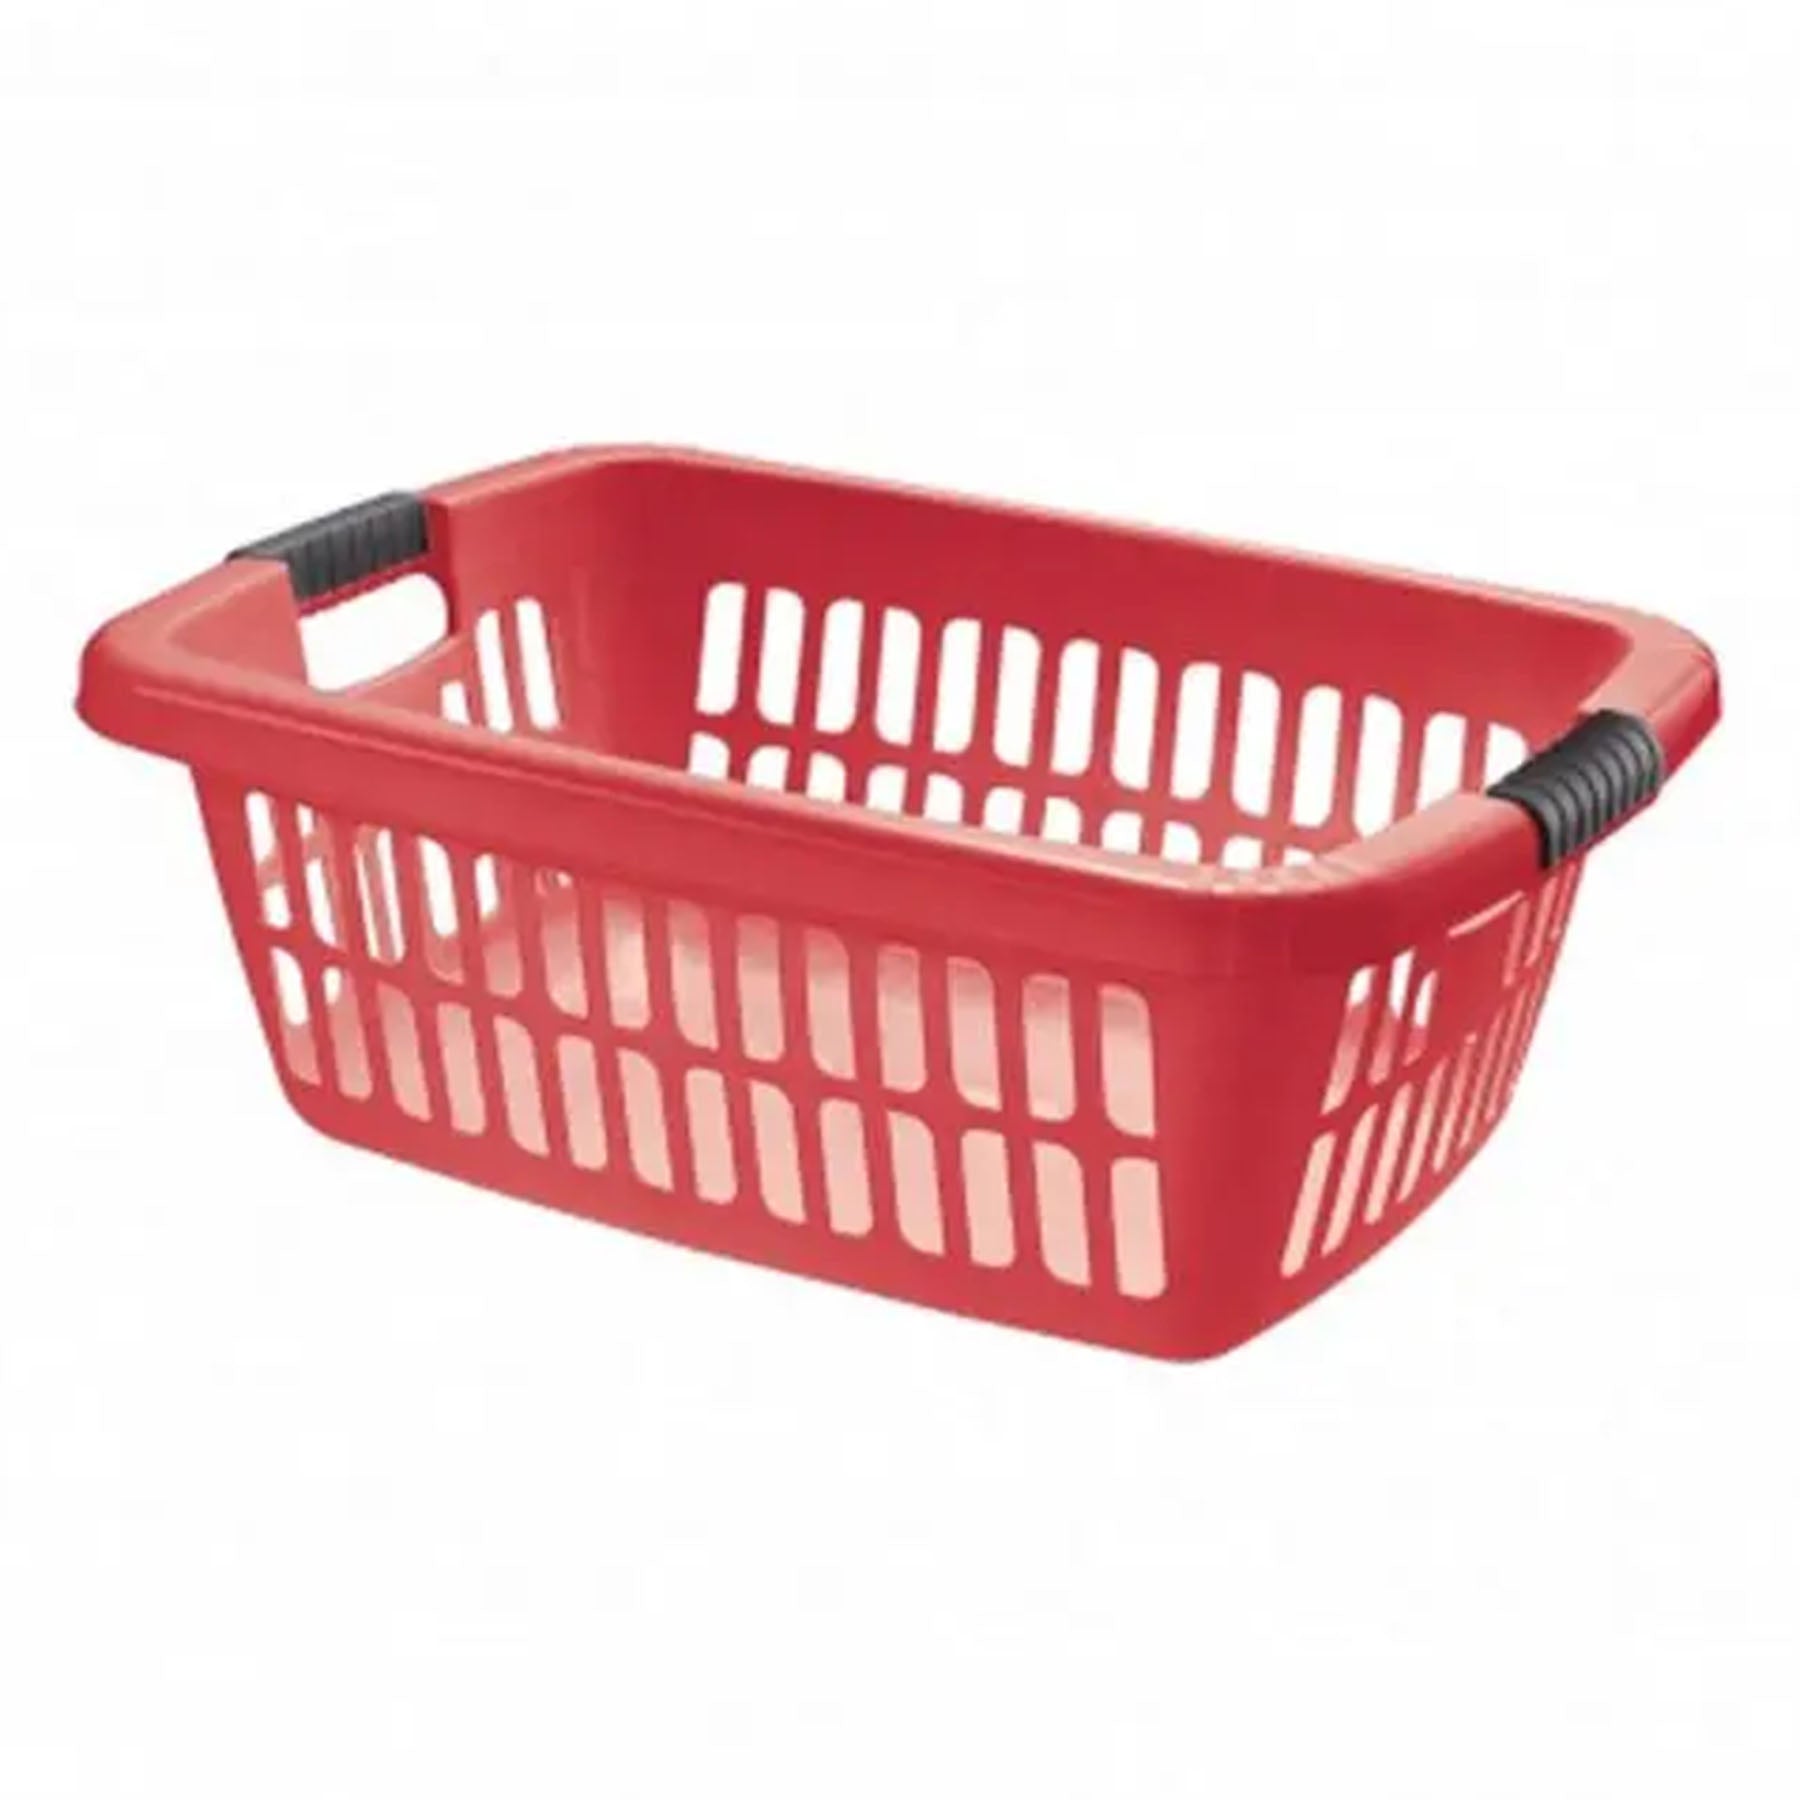 Laundry basket - small - Red Size: 52 x 35 x H20 cm 
 Capacity: 18 L